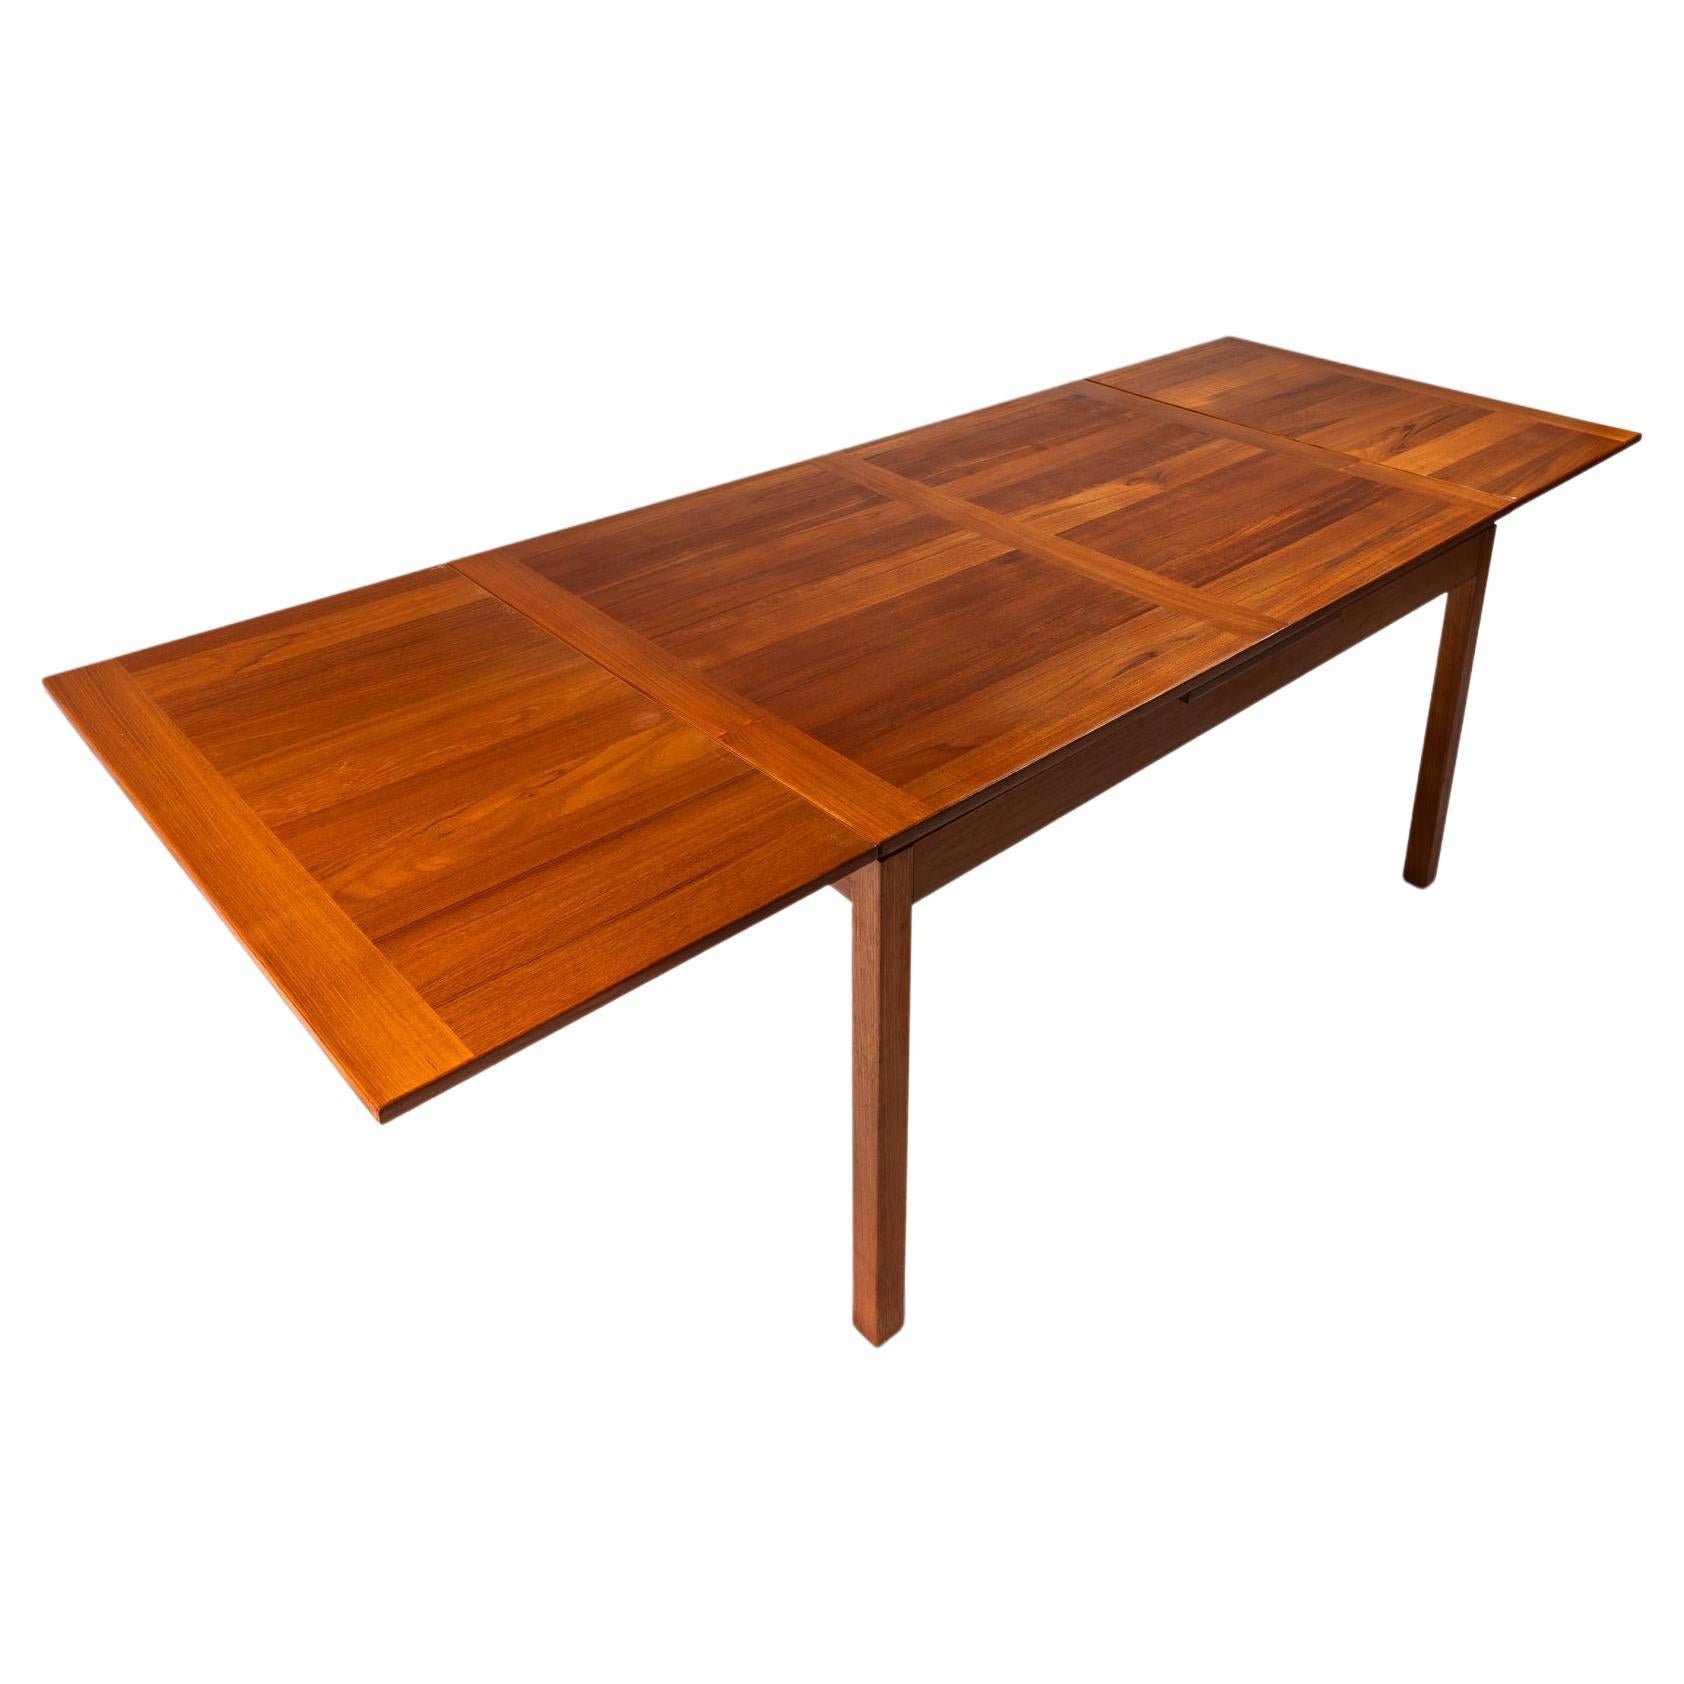 Danish Teak Extension Dining Table with Stow-in-Table Leaves, Denmark, c. 1970s For Sale